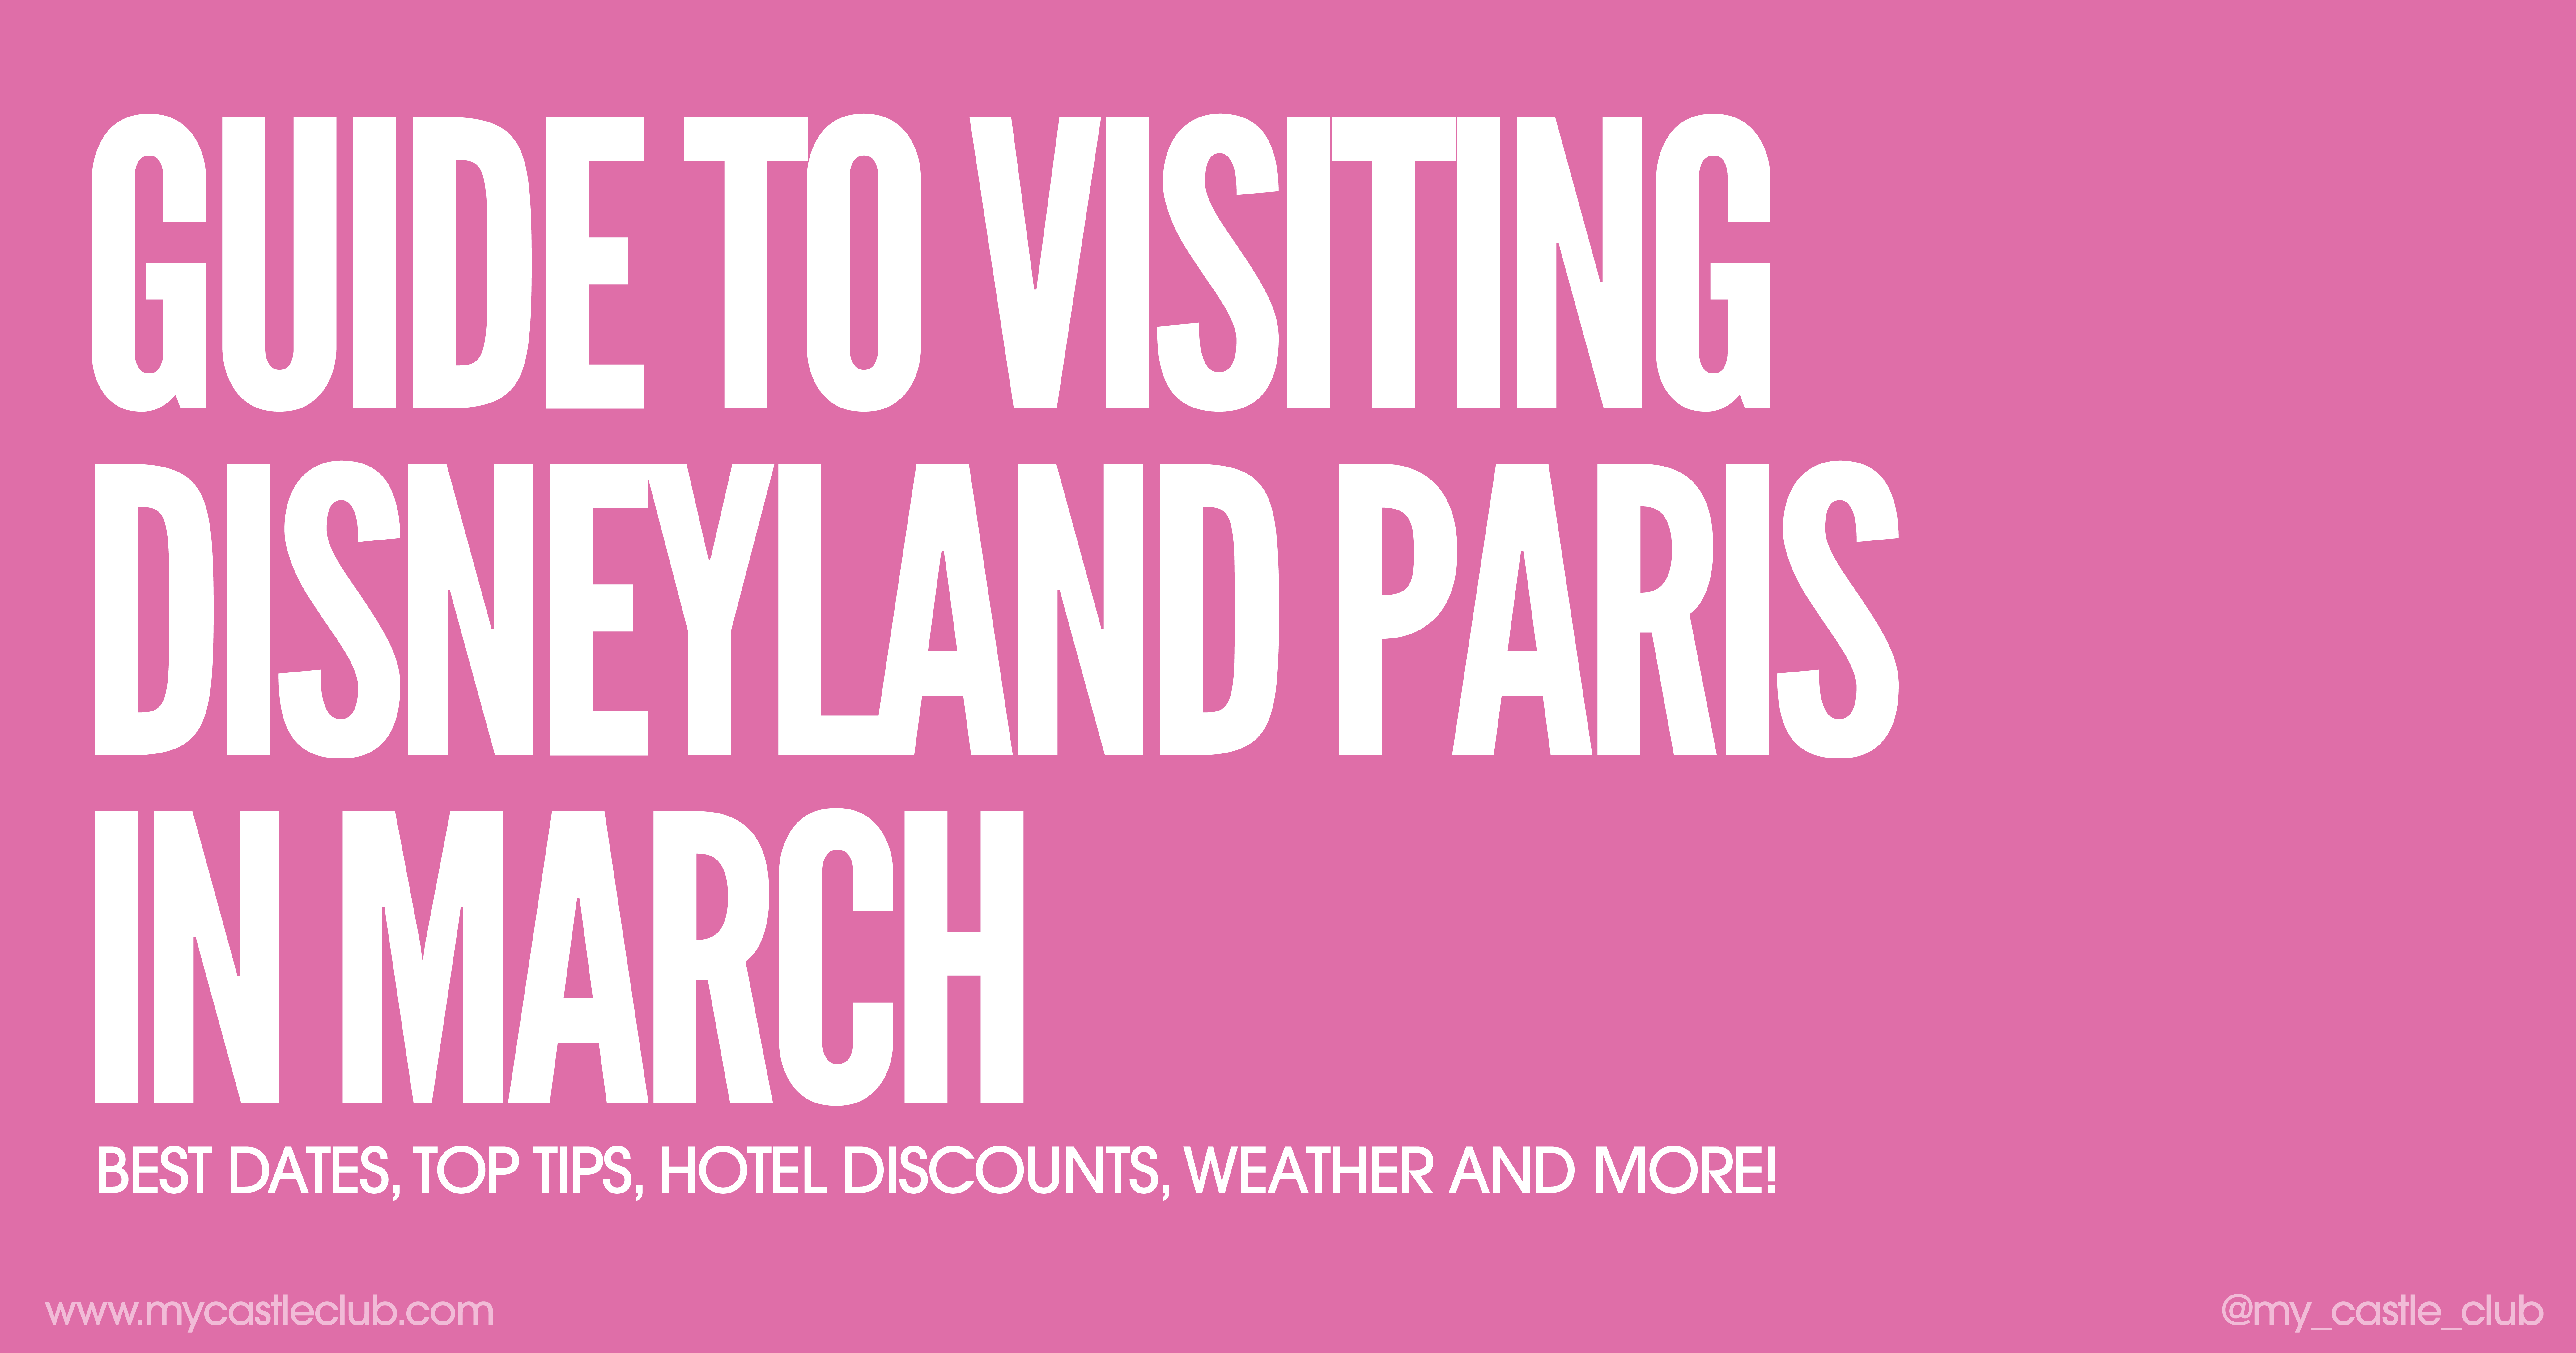 Visiting Disneyland Paris in March, Best Dates, Top Tips, Hotel Discounts, Weather and more!